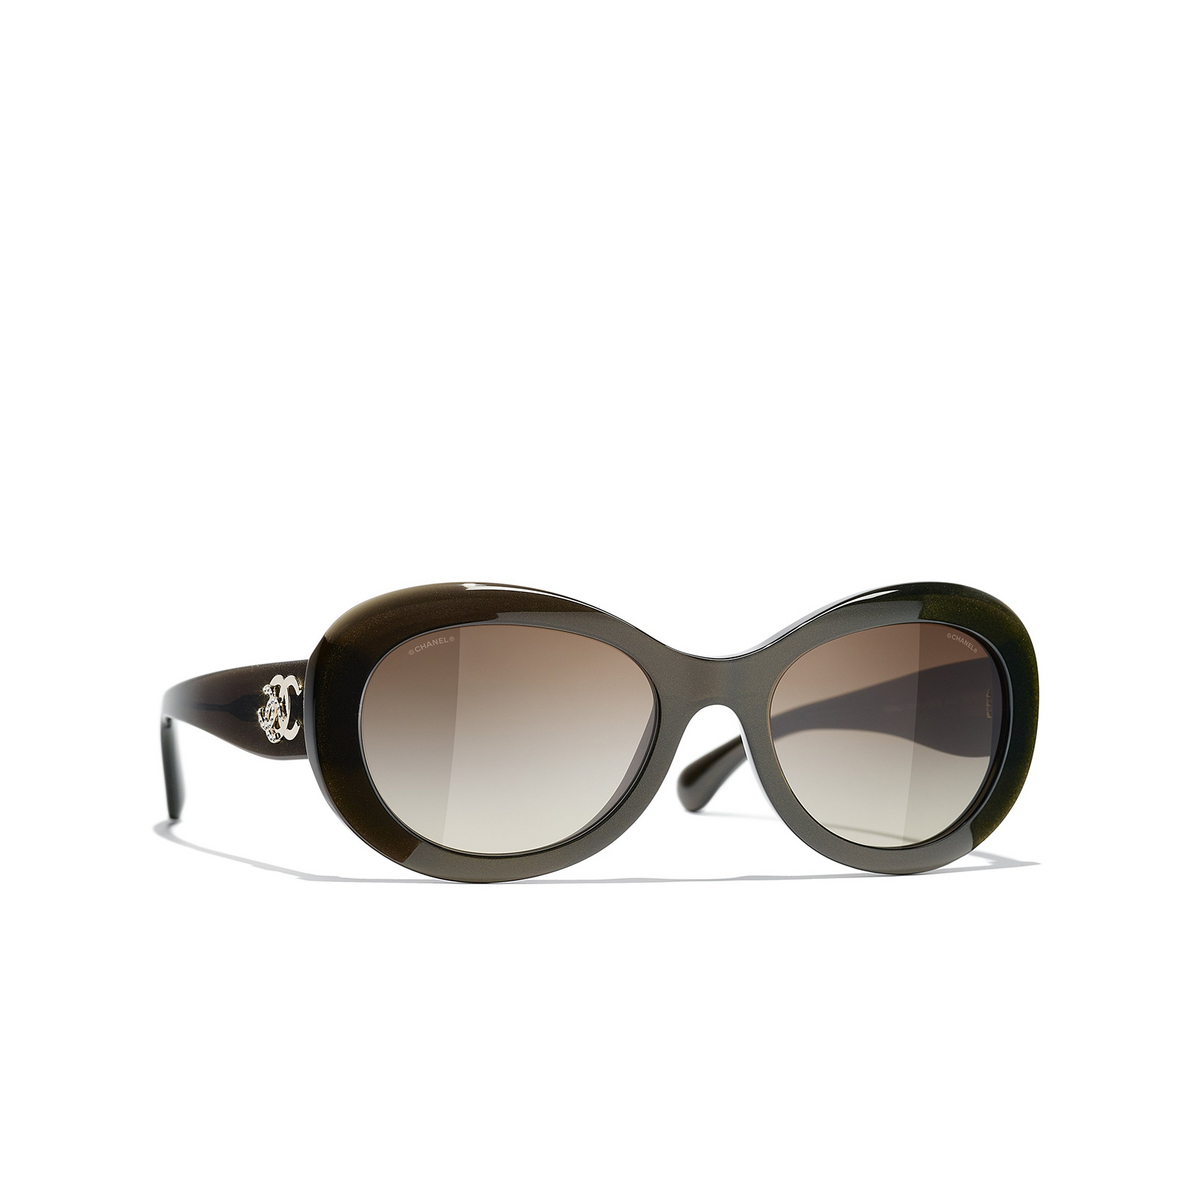 CHANEL oval Sunglasses 1706S5 Brown - three-quarters view